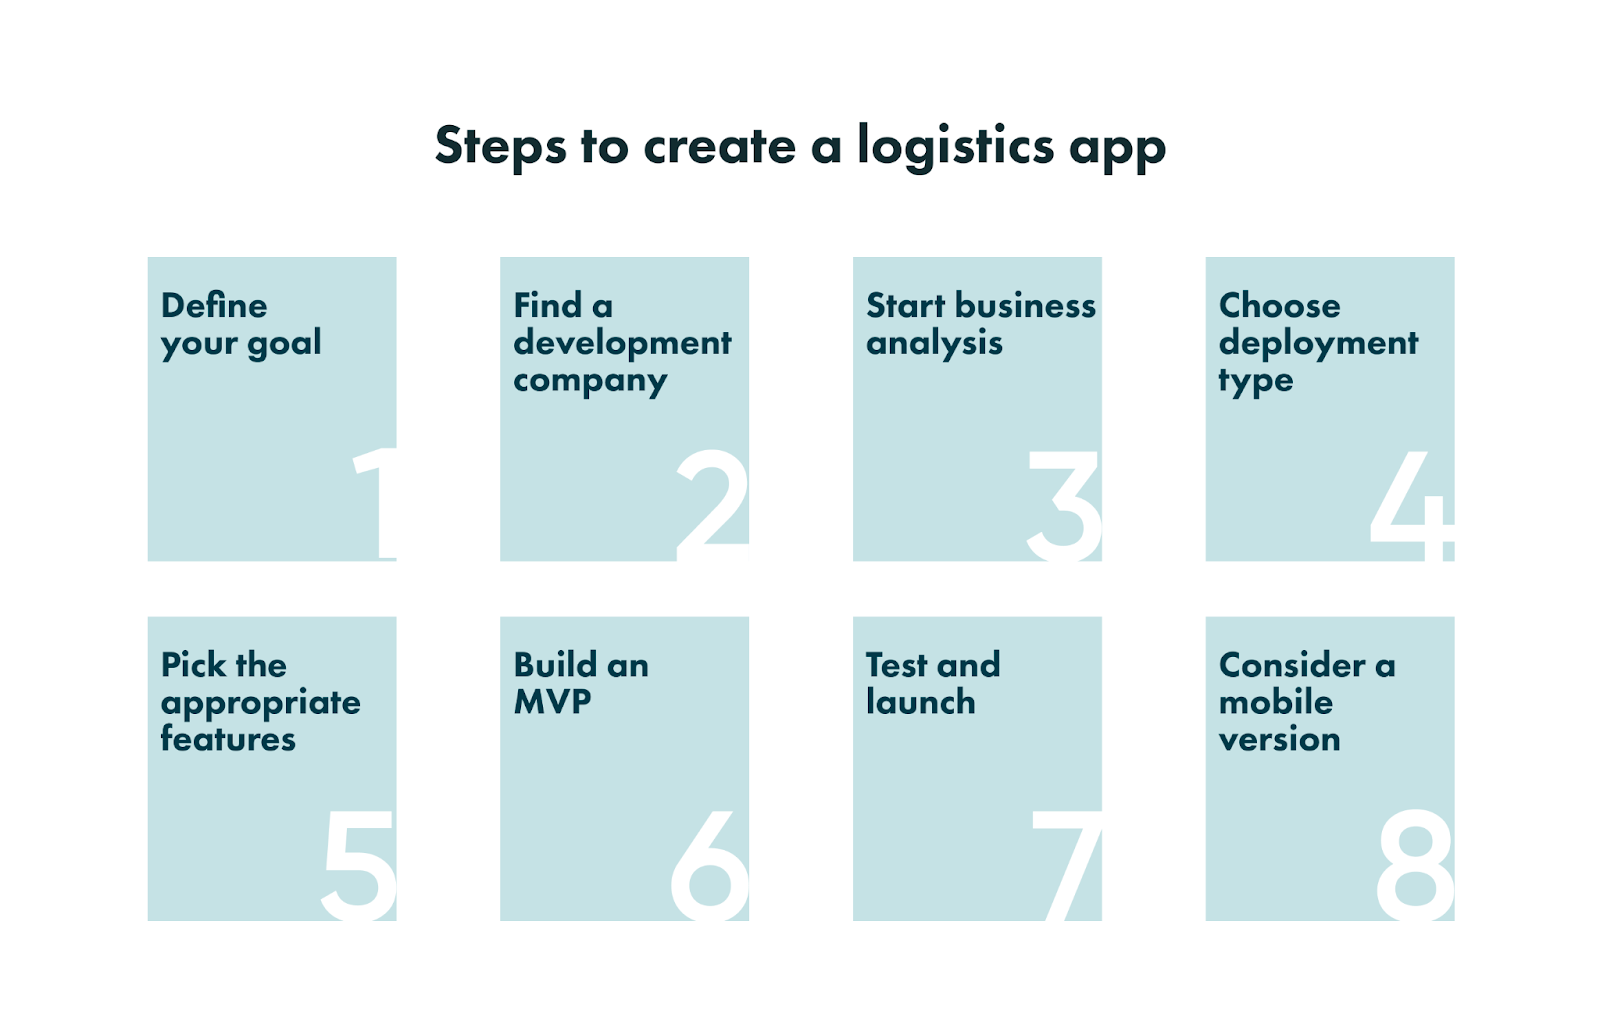 Logistics web development process includes a logistics app design and logistics app features. Hence, our goal is to show how the app is created. 